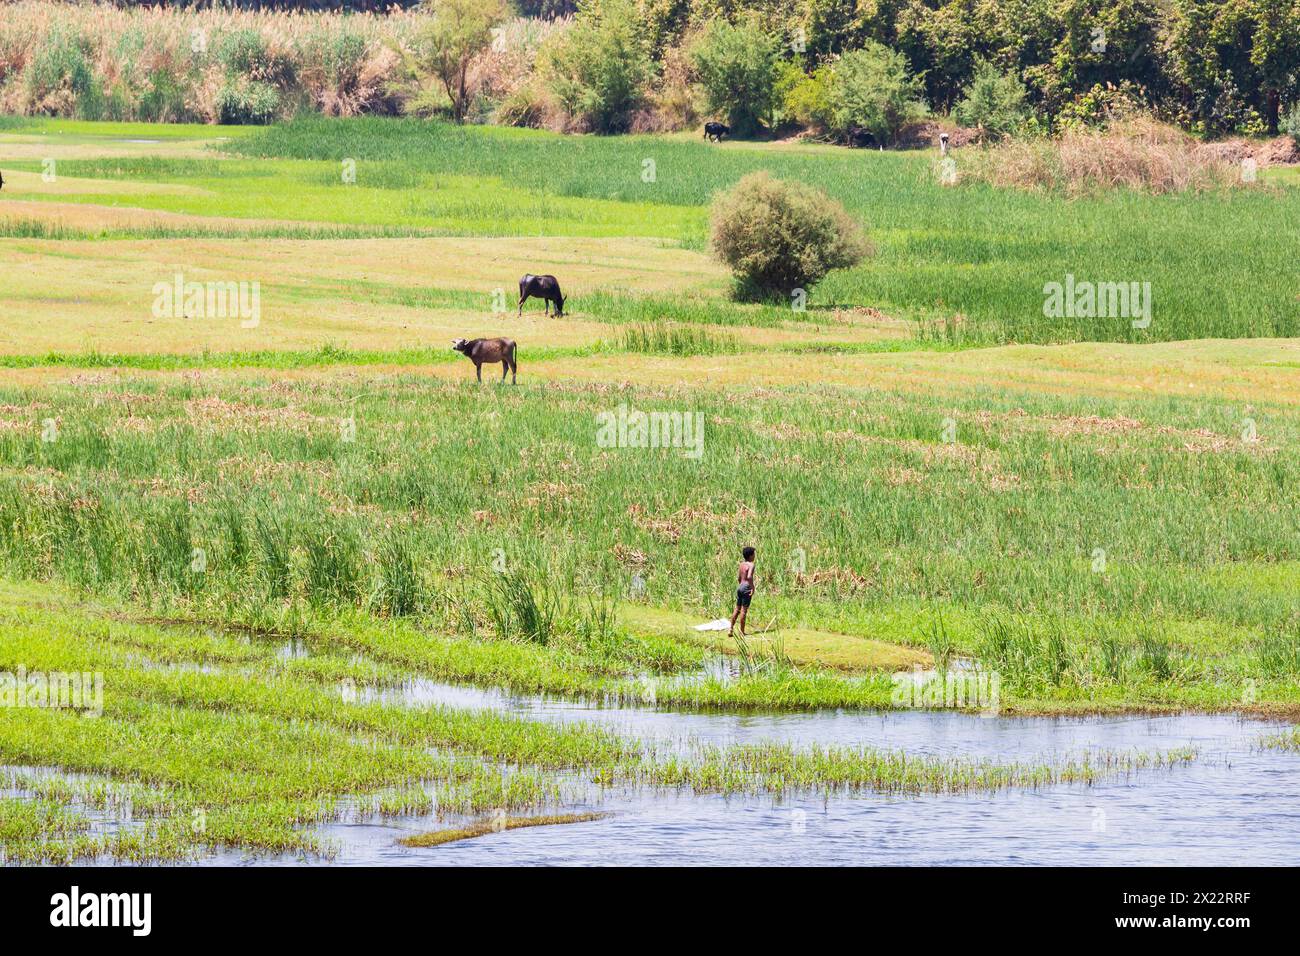 Farmer with water buffalo on the banks of the River nile between Luxor and Aswan, Egypt Stock Photo